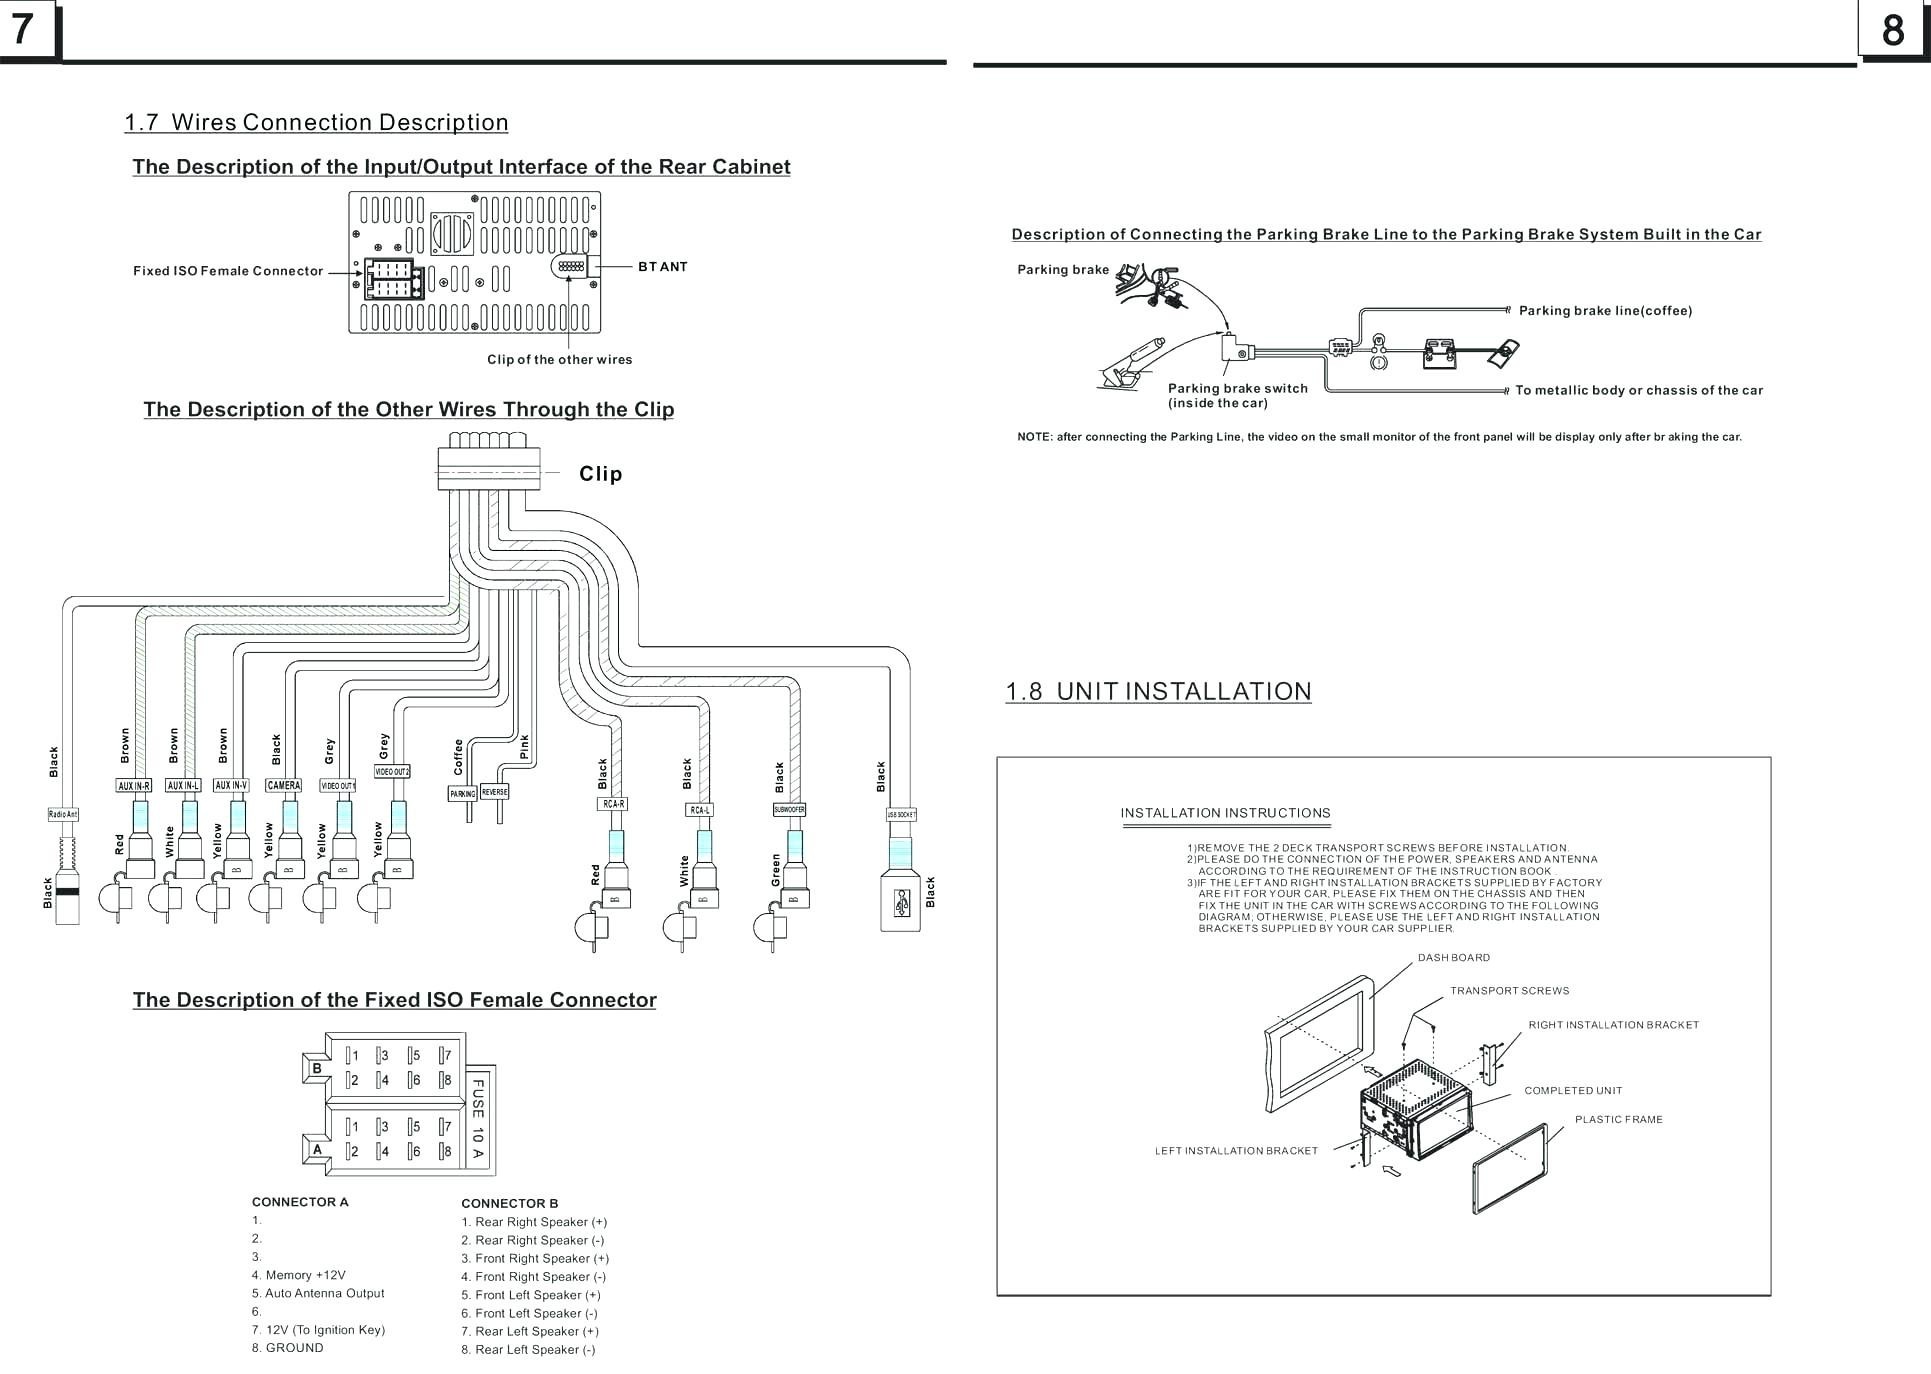 Boss V Plow Wiring Diagram Awesome Fisher Mm1 Pump Wiring Diagram Plow Minute Mount 2 for